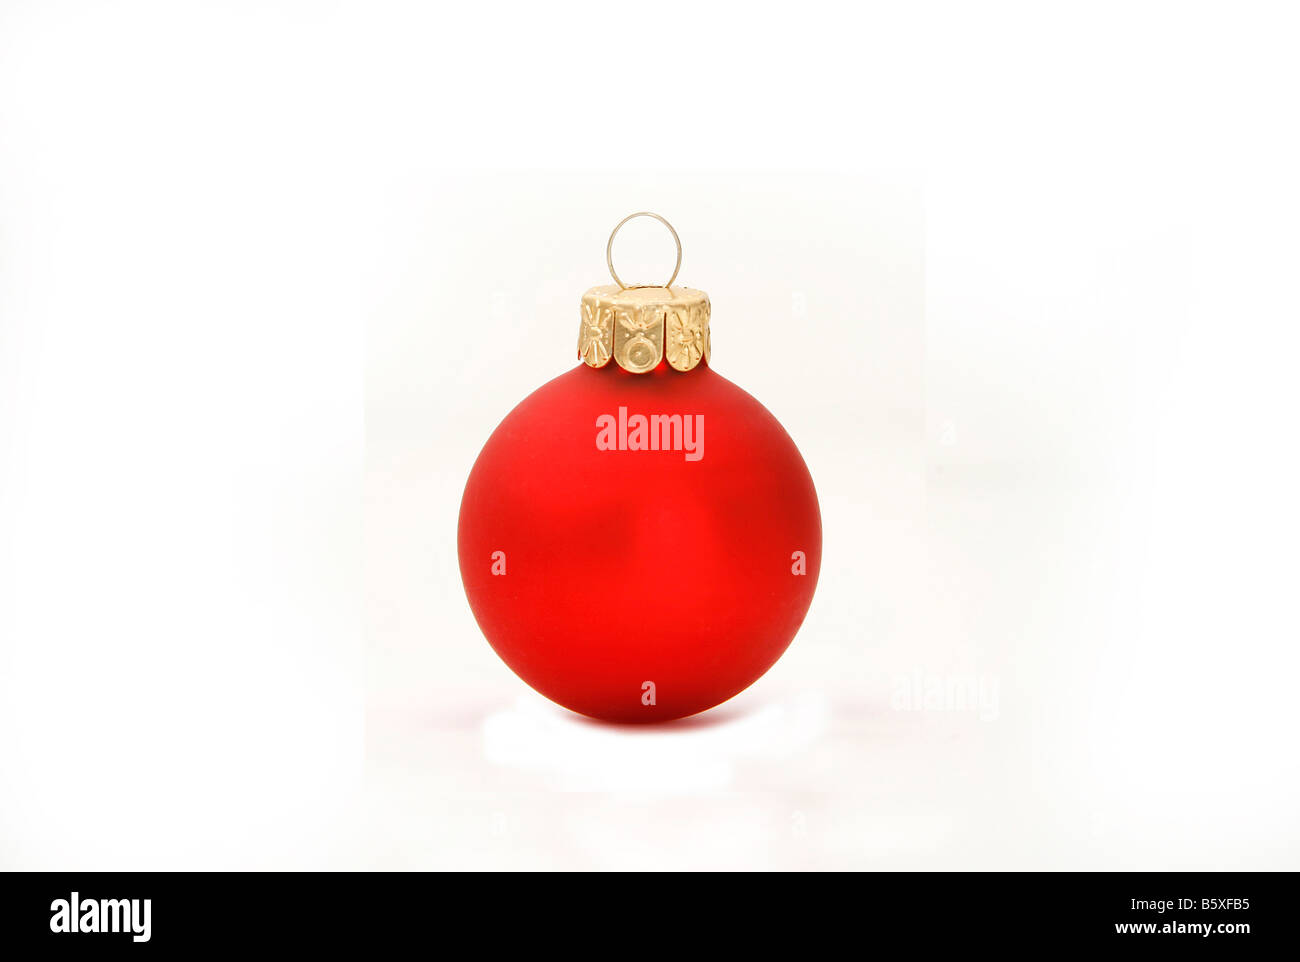 Red Christmas ball decoration with drop shadow Stock Photo